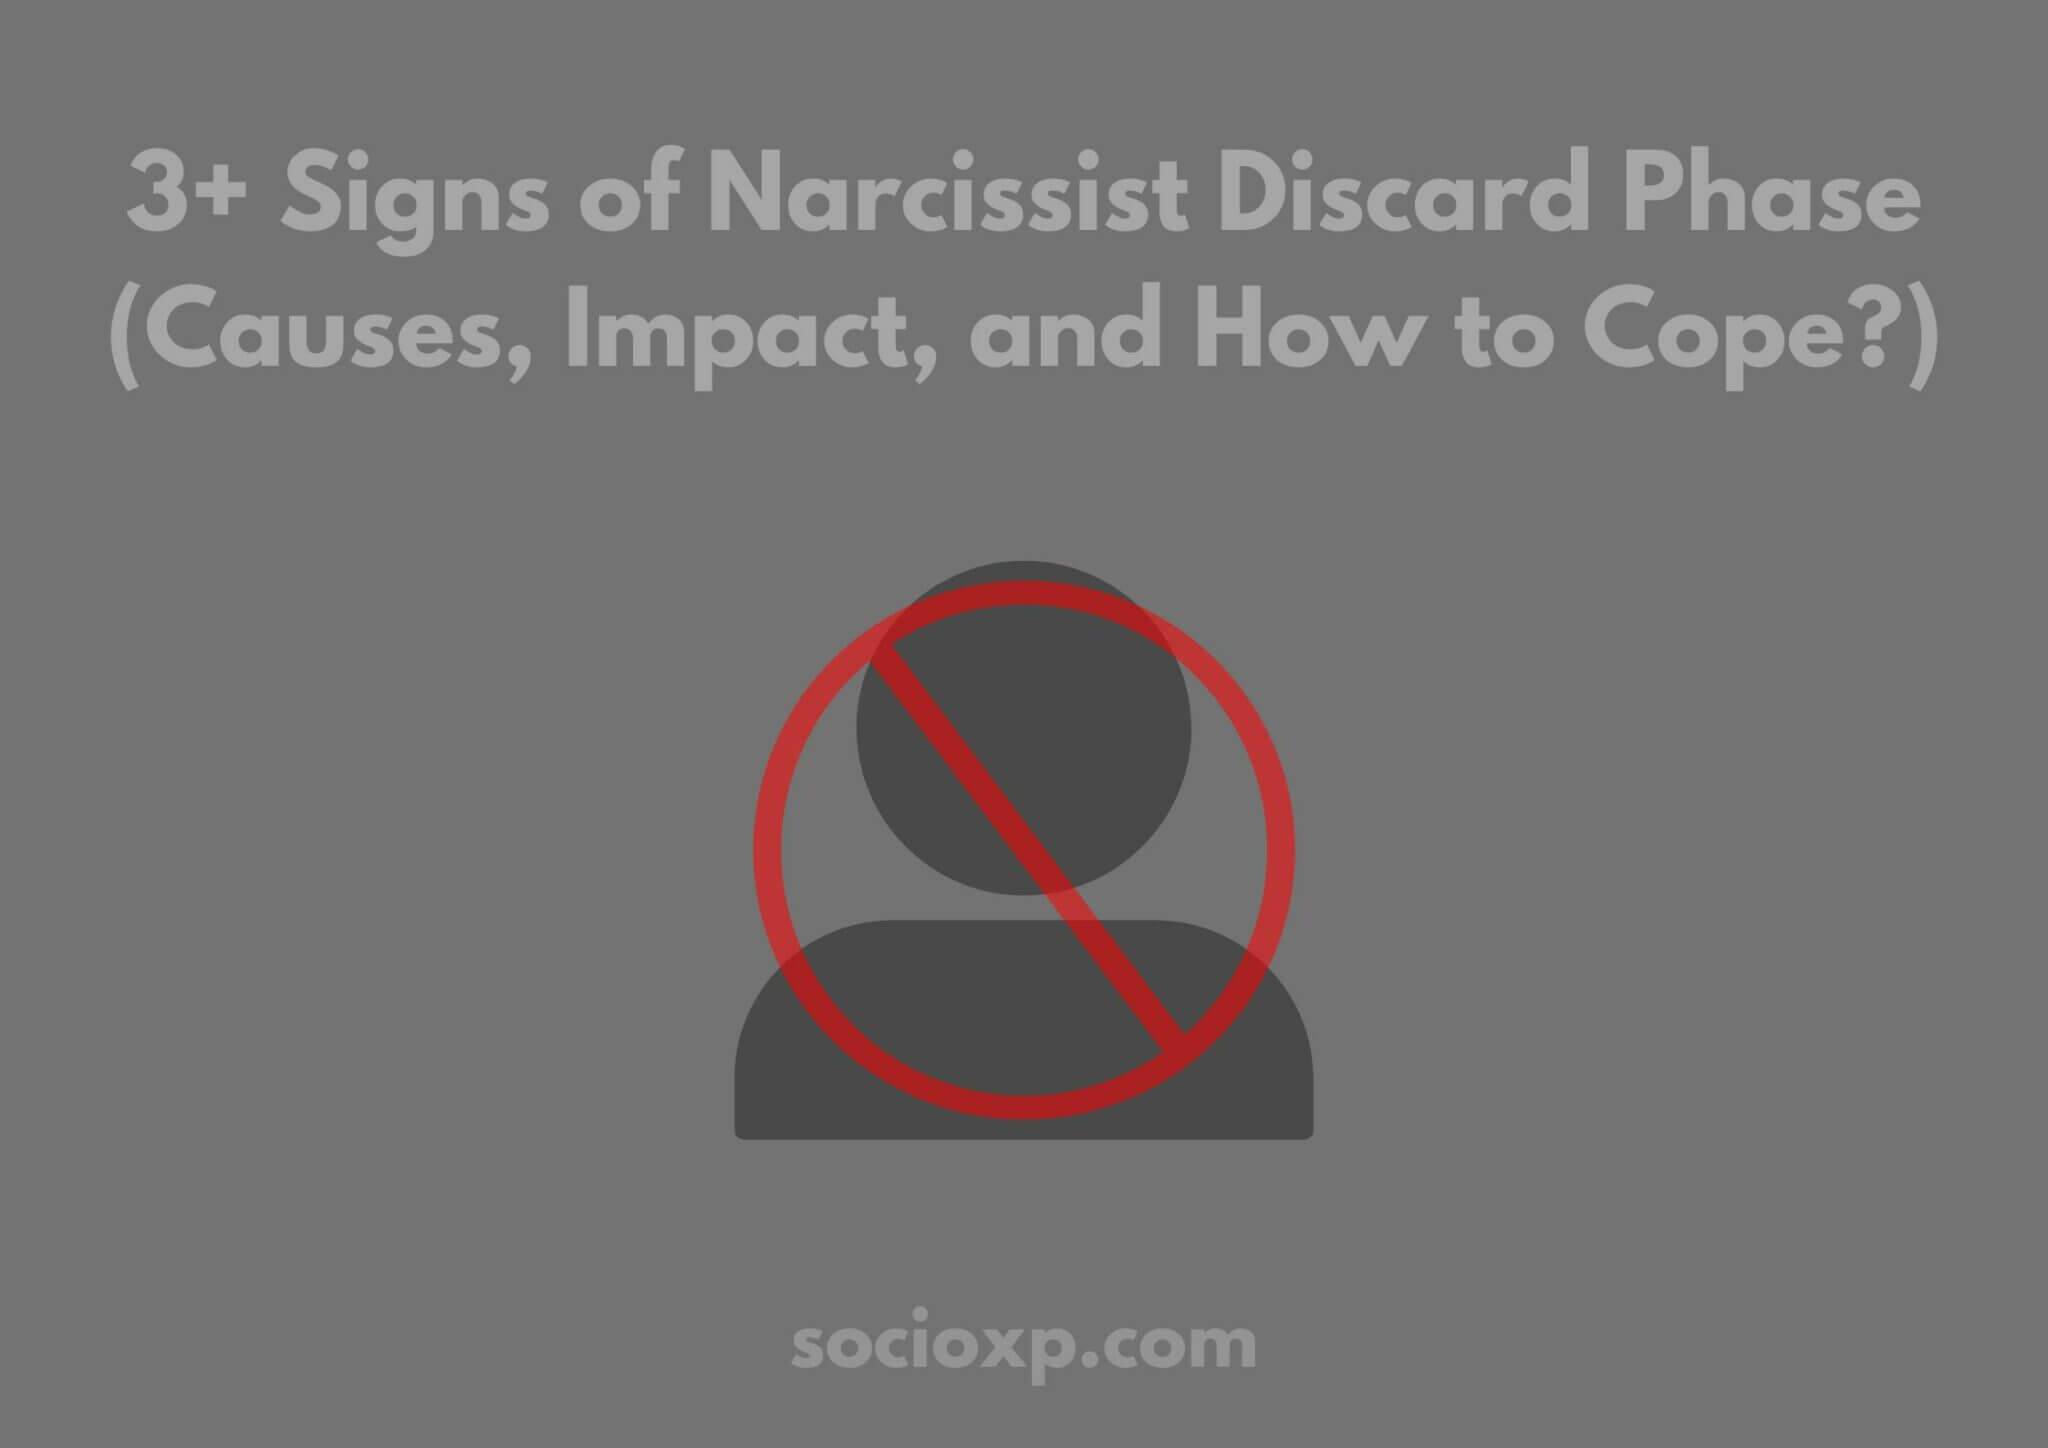 3+ Signs of Narcissist Discard Phase (Causes, Impact, and How to Cope?)